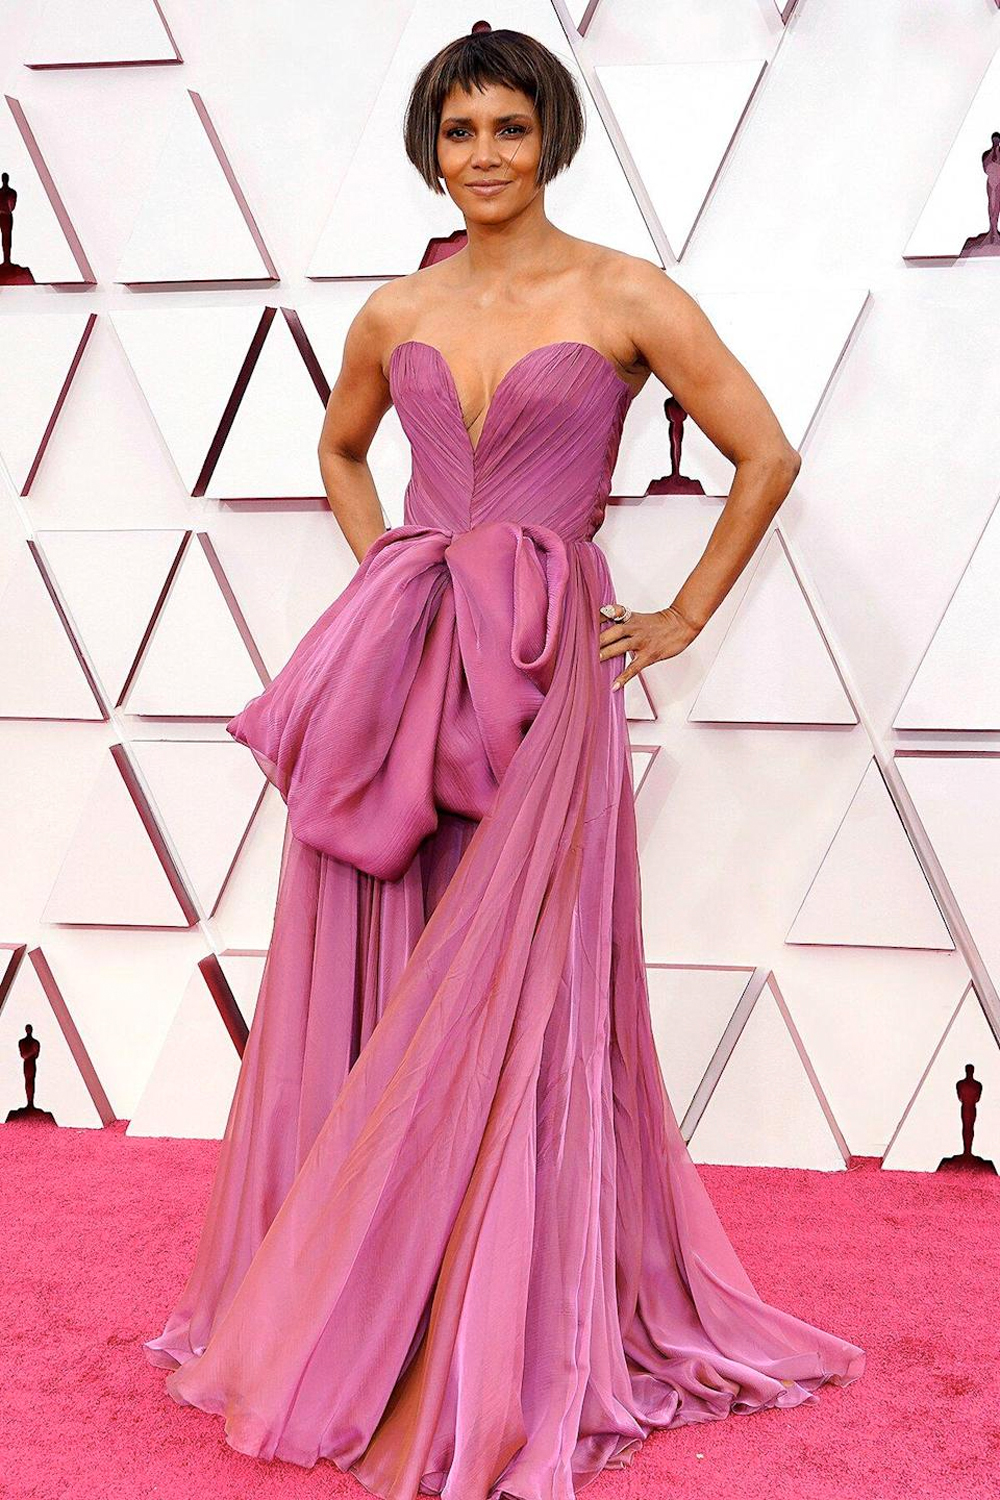 Halle Berry in a magical pink dress at the Oscars About Her